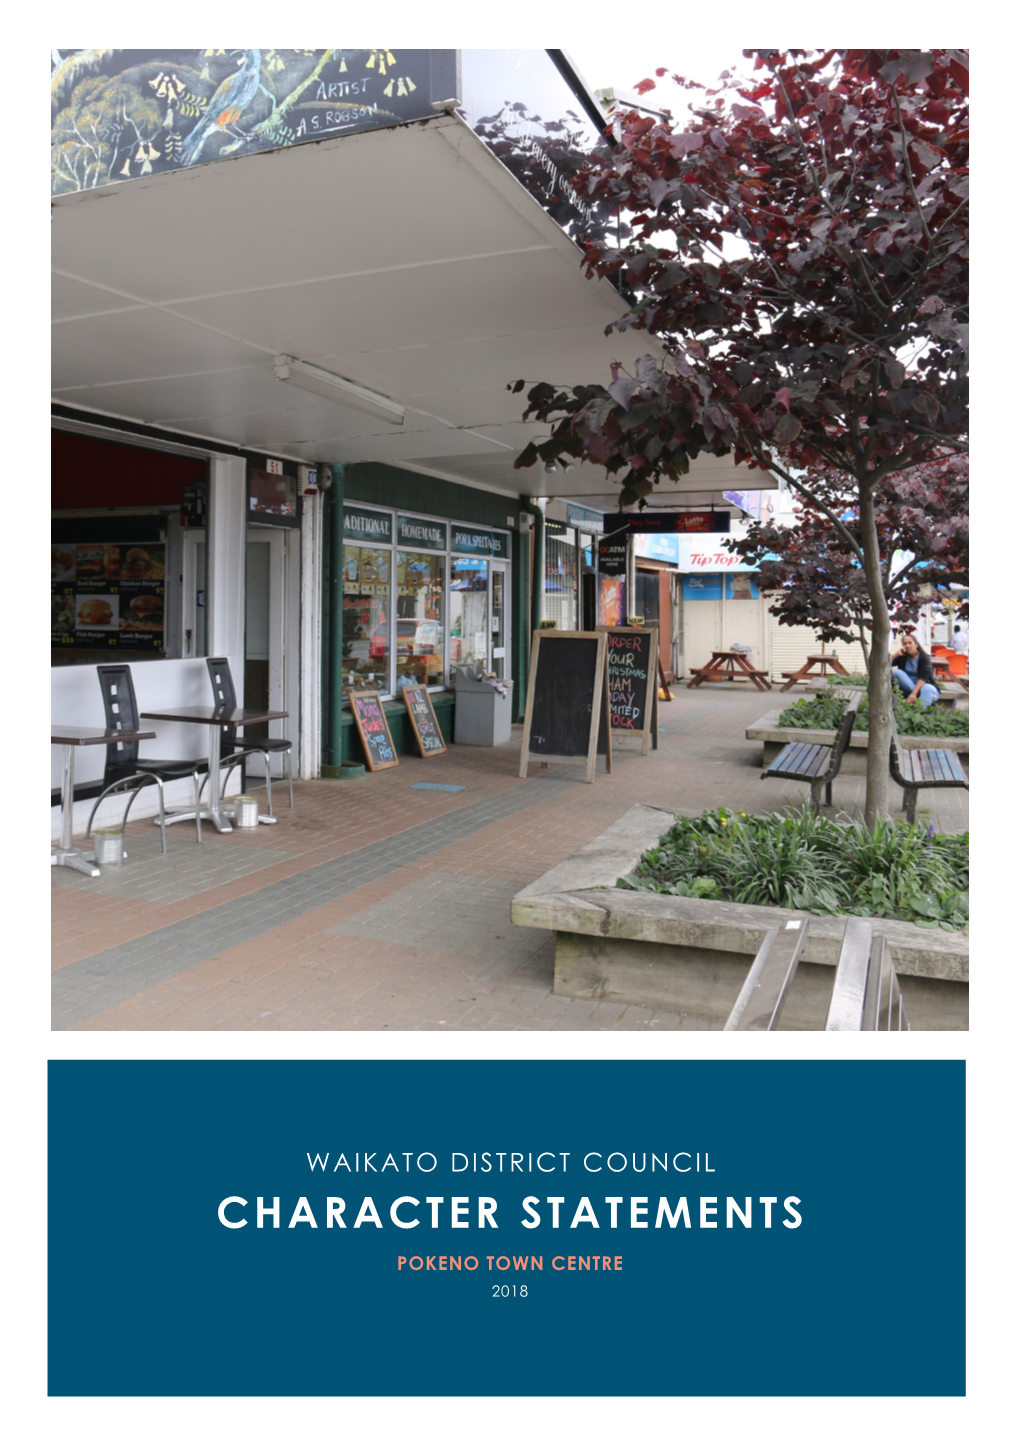 CHARACTER STATEMENTS POKENO TOWN CENTRE 2018 Beca 2017 (Unless Beca Has Expressly Agreed Otherwise with the Client in Writing)